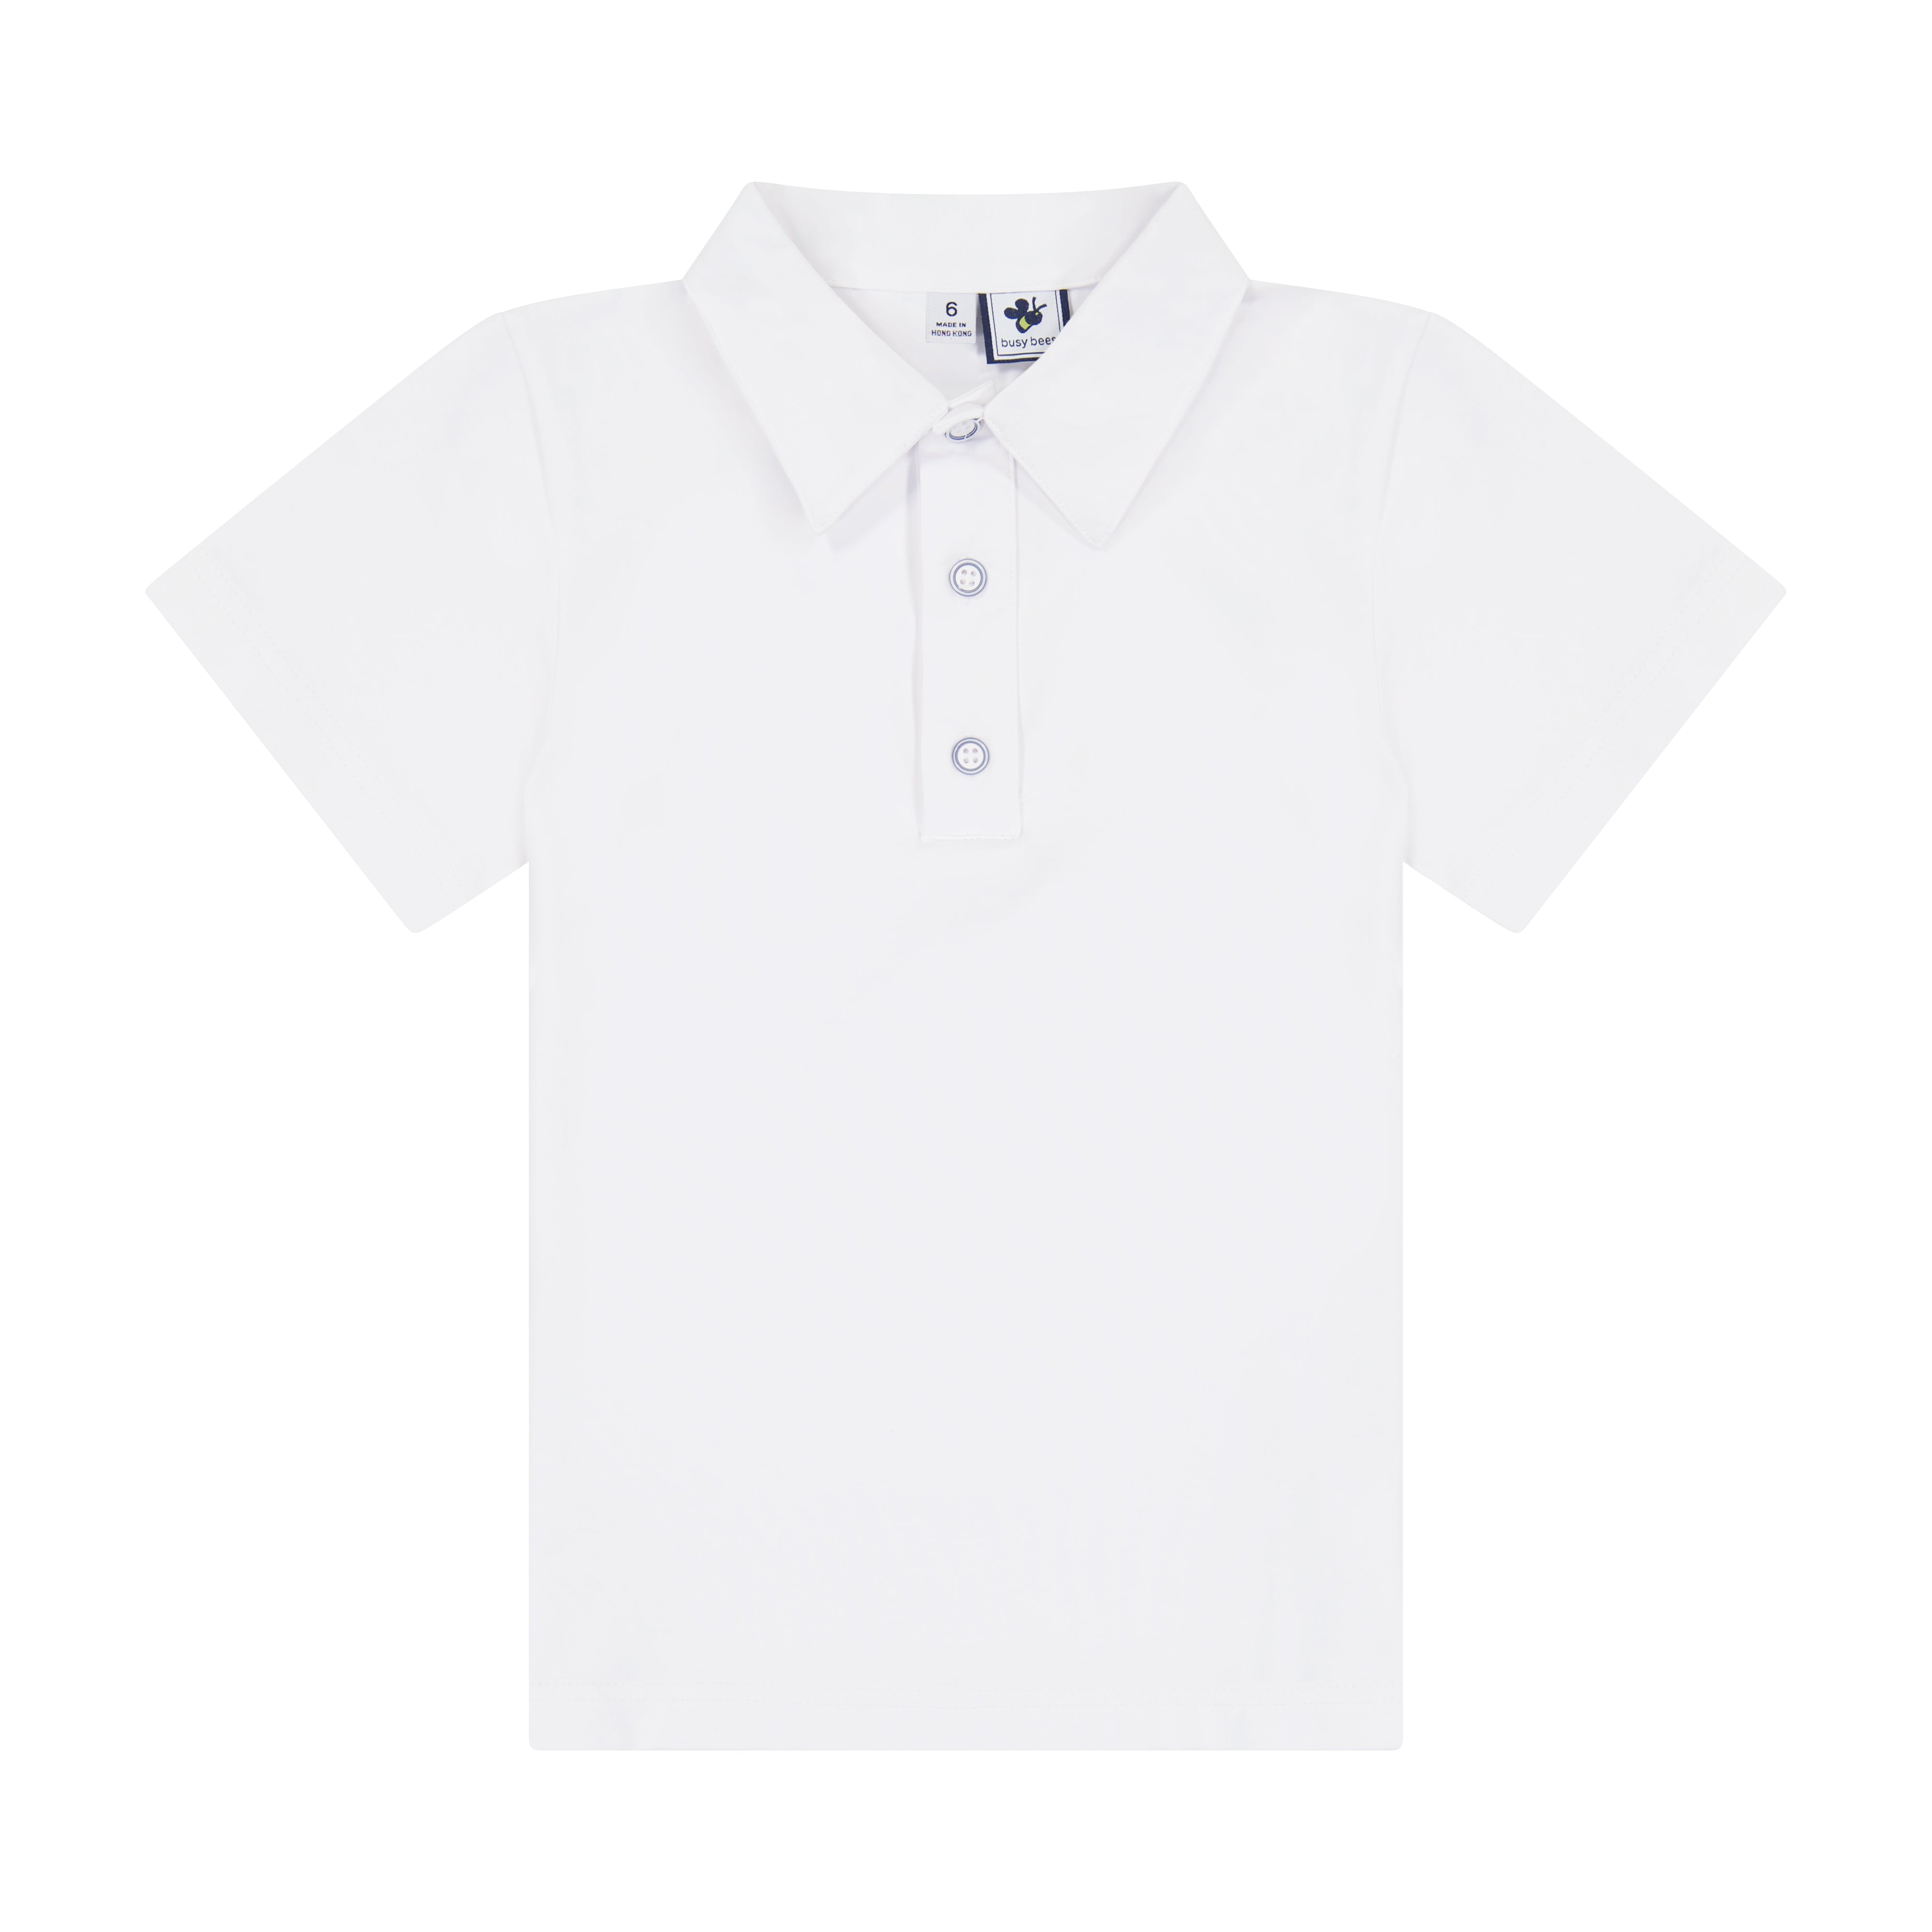 Boys Short Sleeve Polo White Knit – Busy Bees